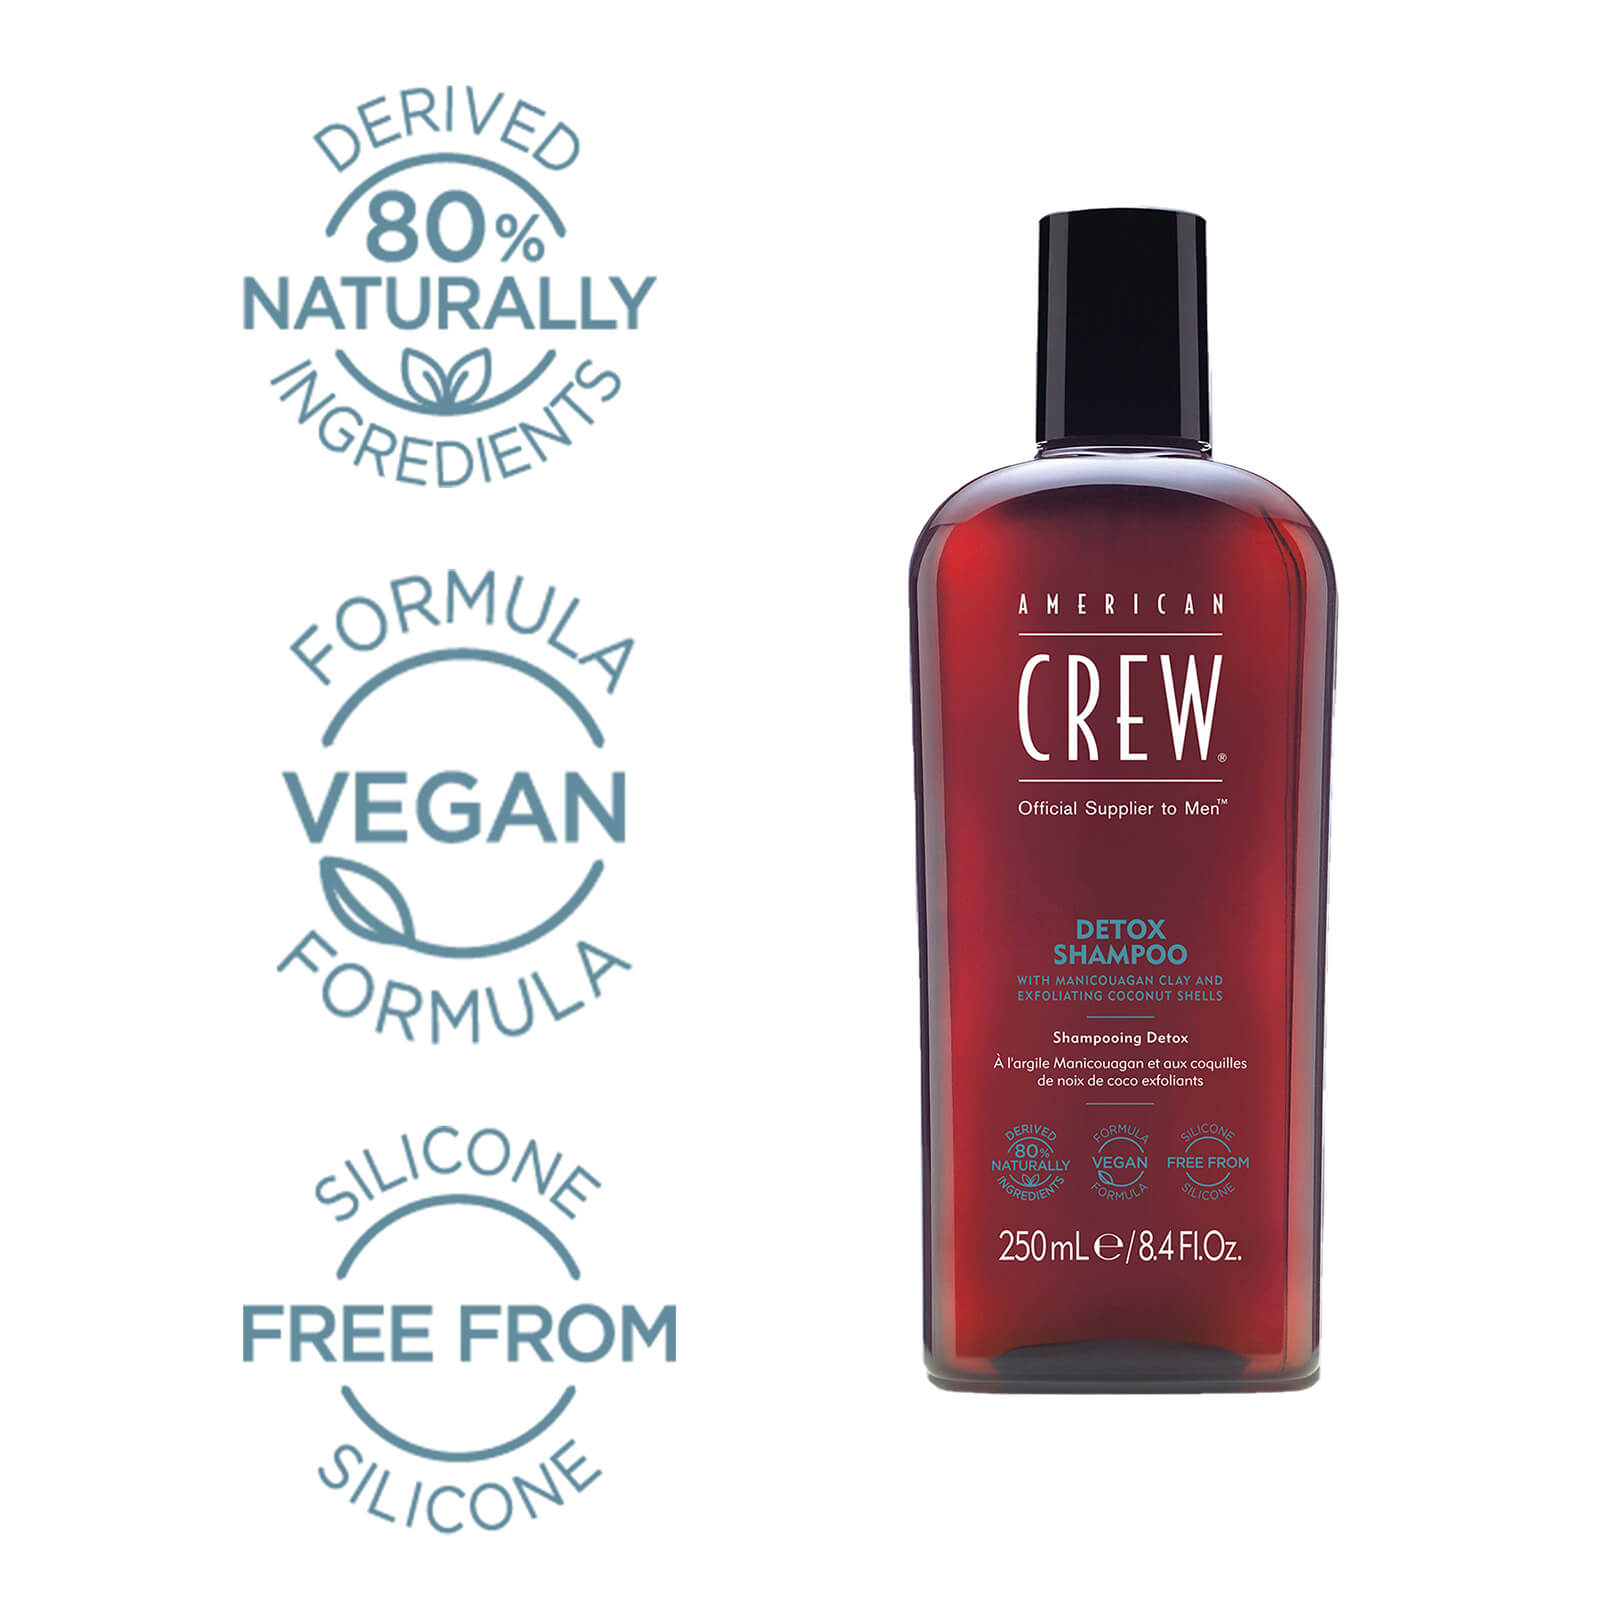 Naturally Ingredients.Vegan formula.Free from silicone